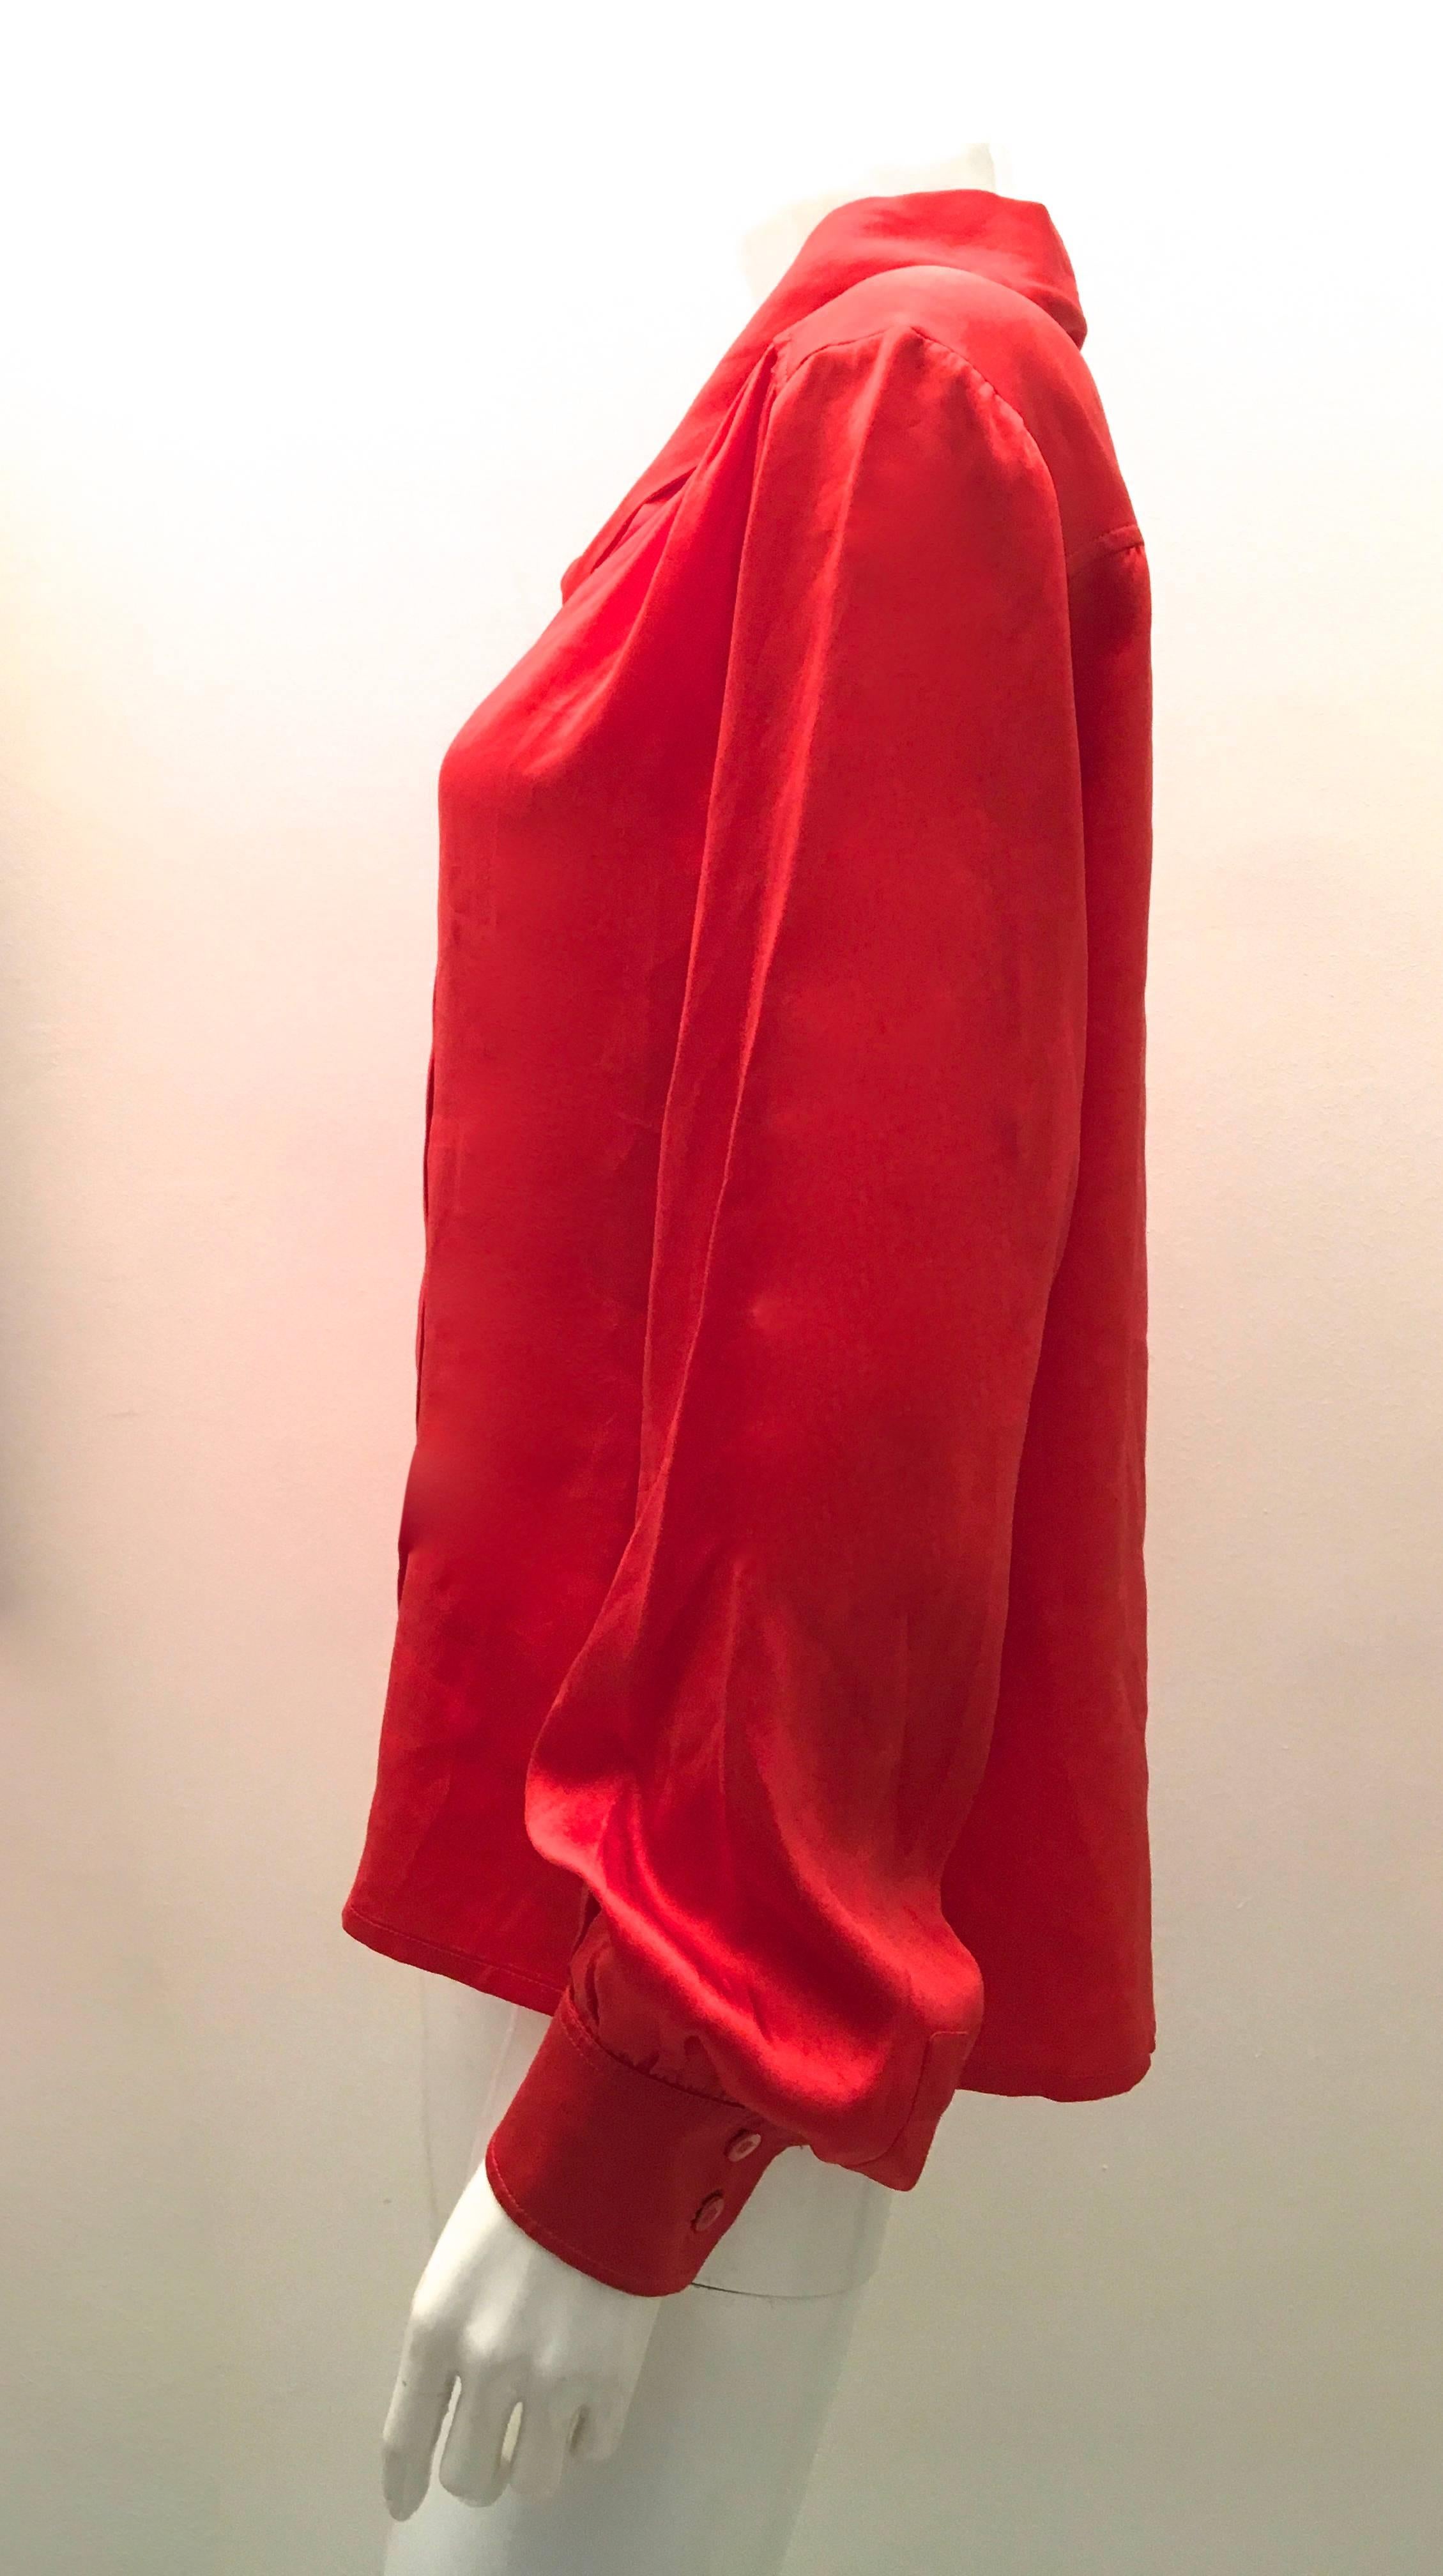 Presented here is a Celine blouse. The blouse is made of 100% silk and is a red / orange coloring. The blouse has a this wrap around scarf that is sewn into the blouse. The scarf can be worn as a tie or as a small scarf depending upon desired look.